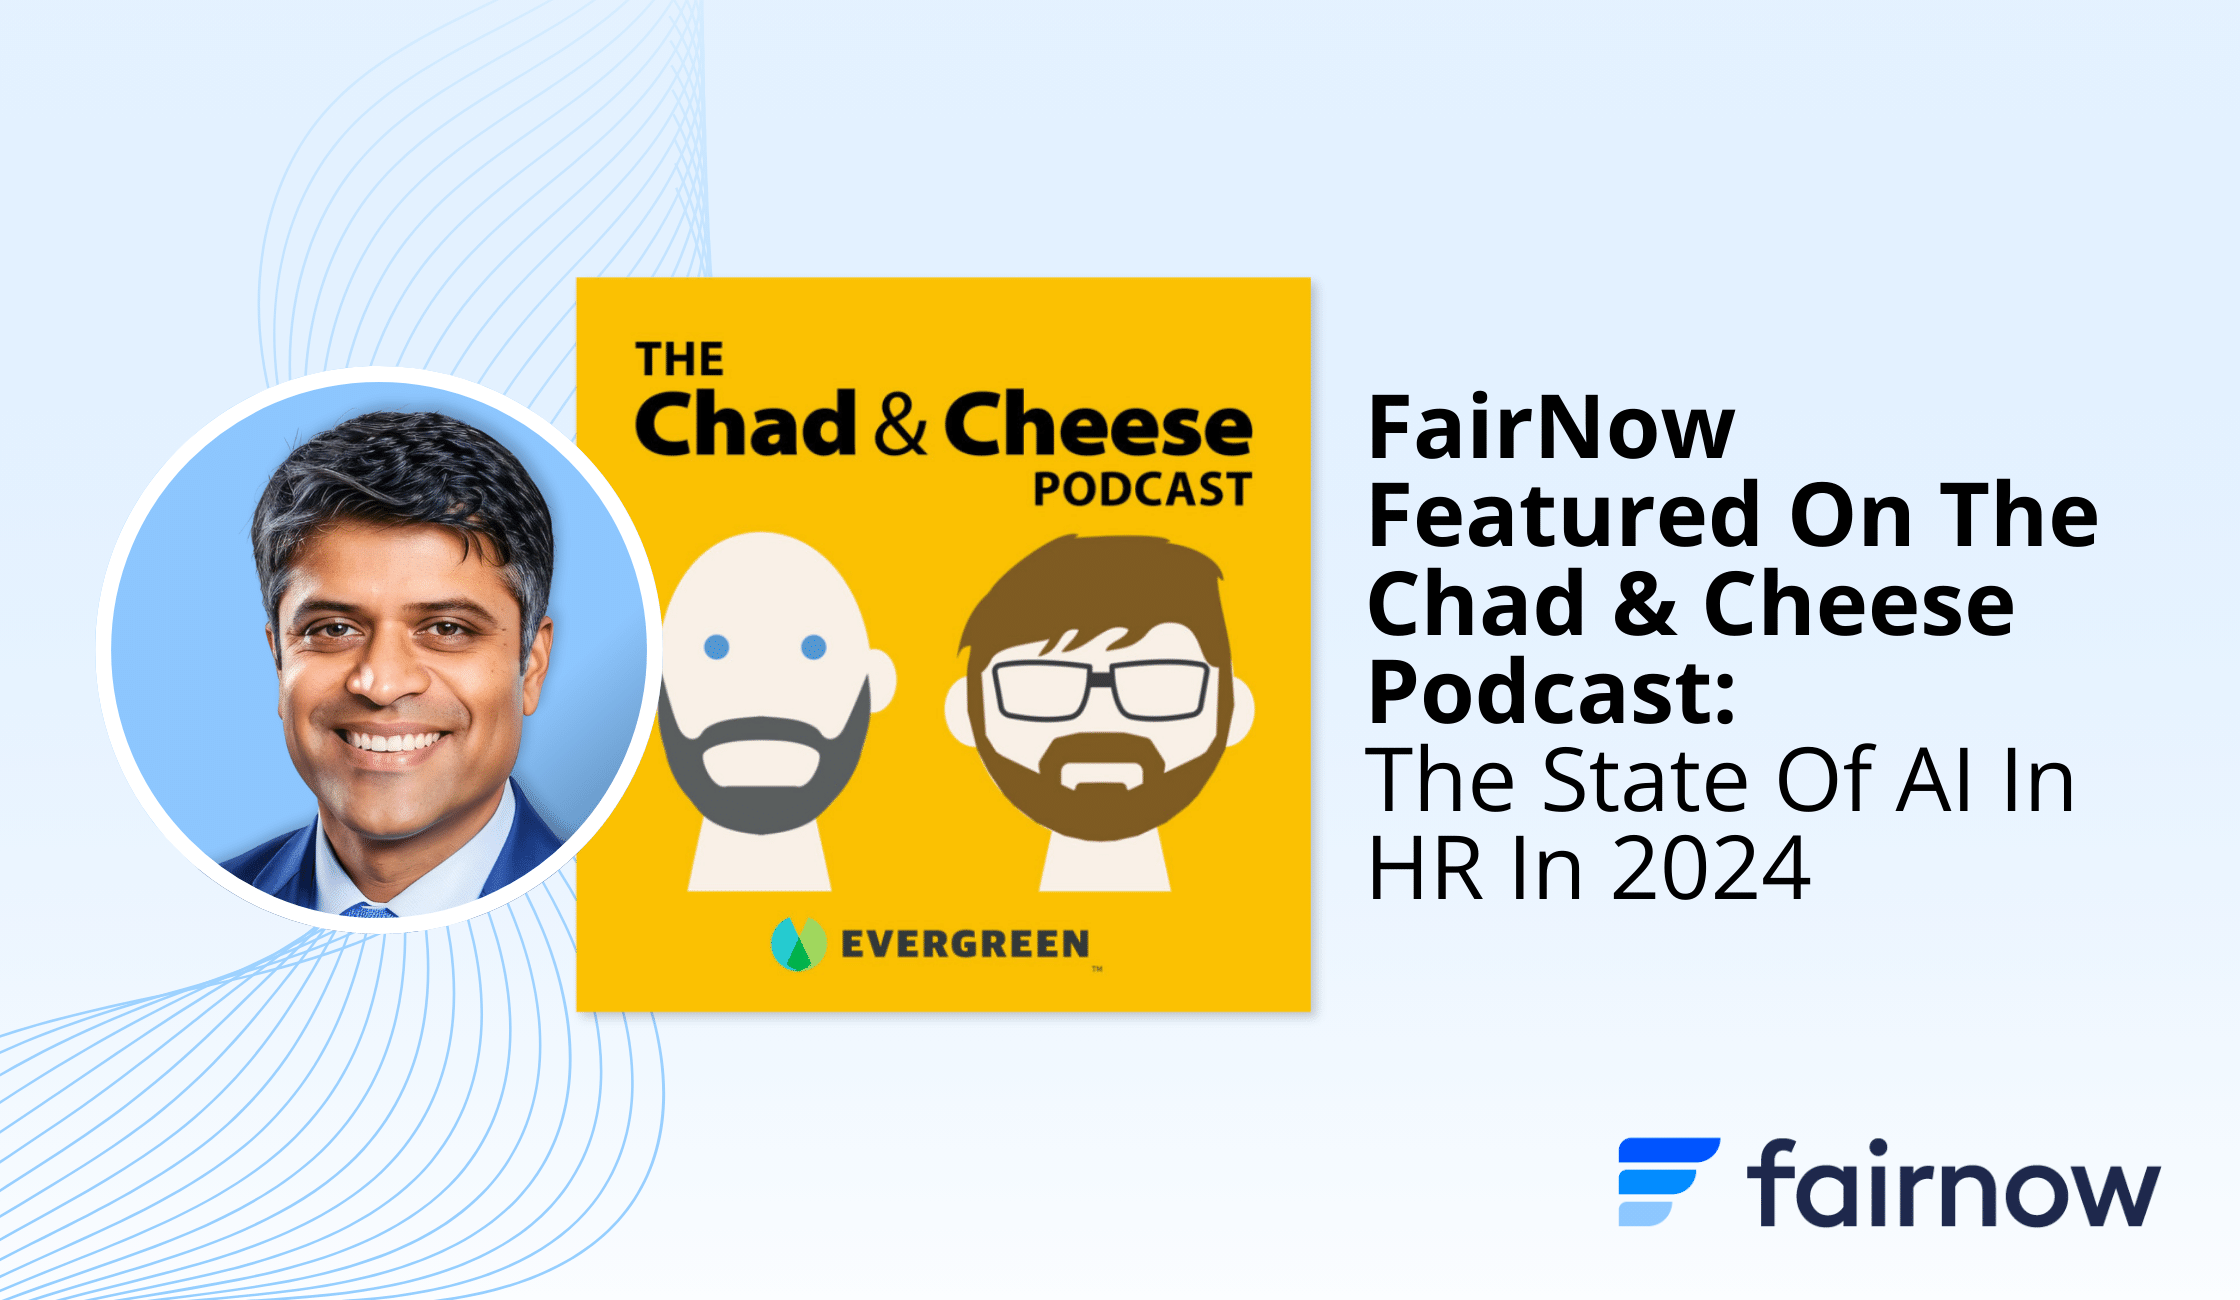 Chad & Cheese Podcast